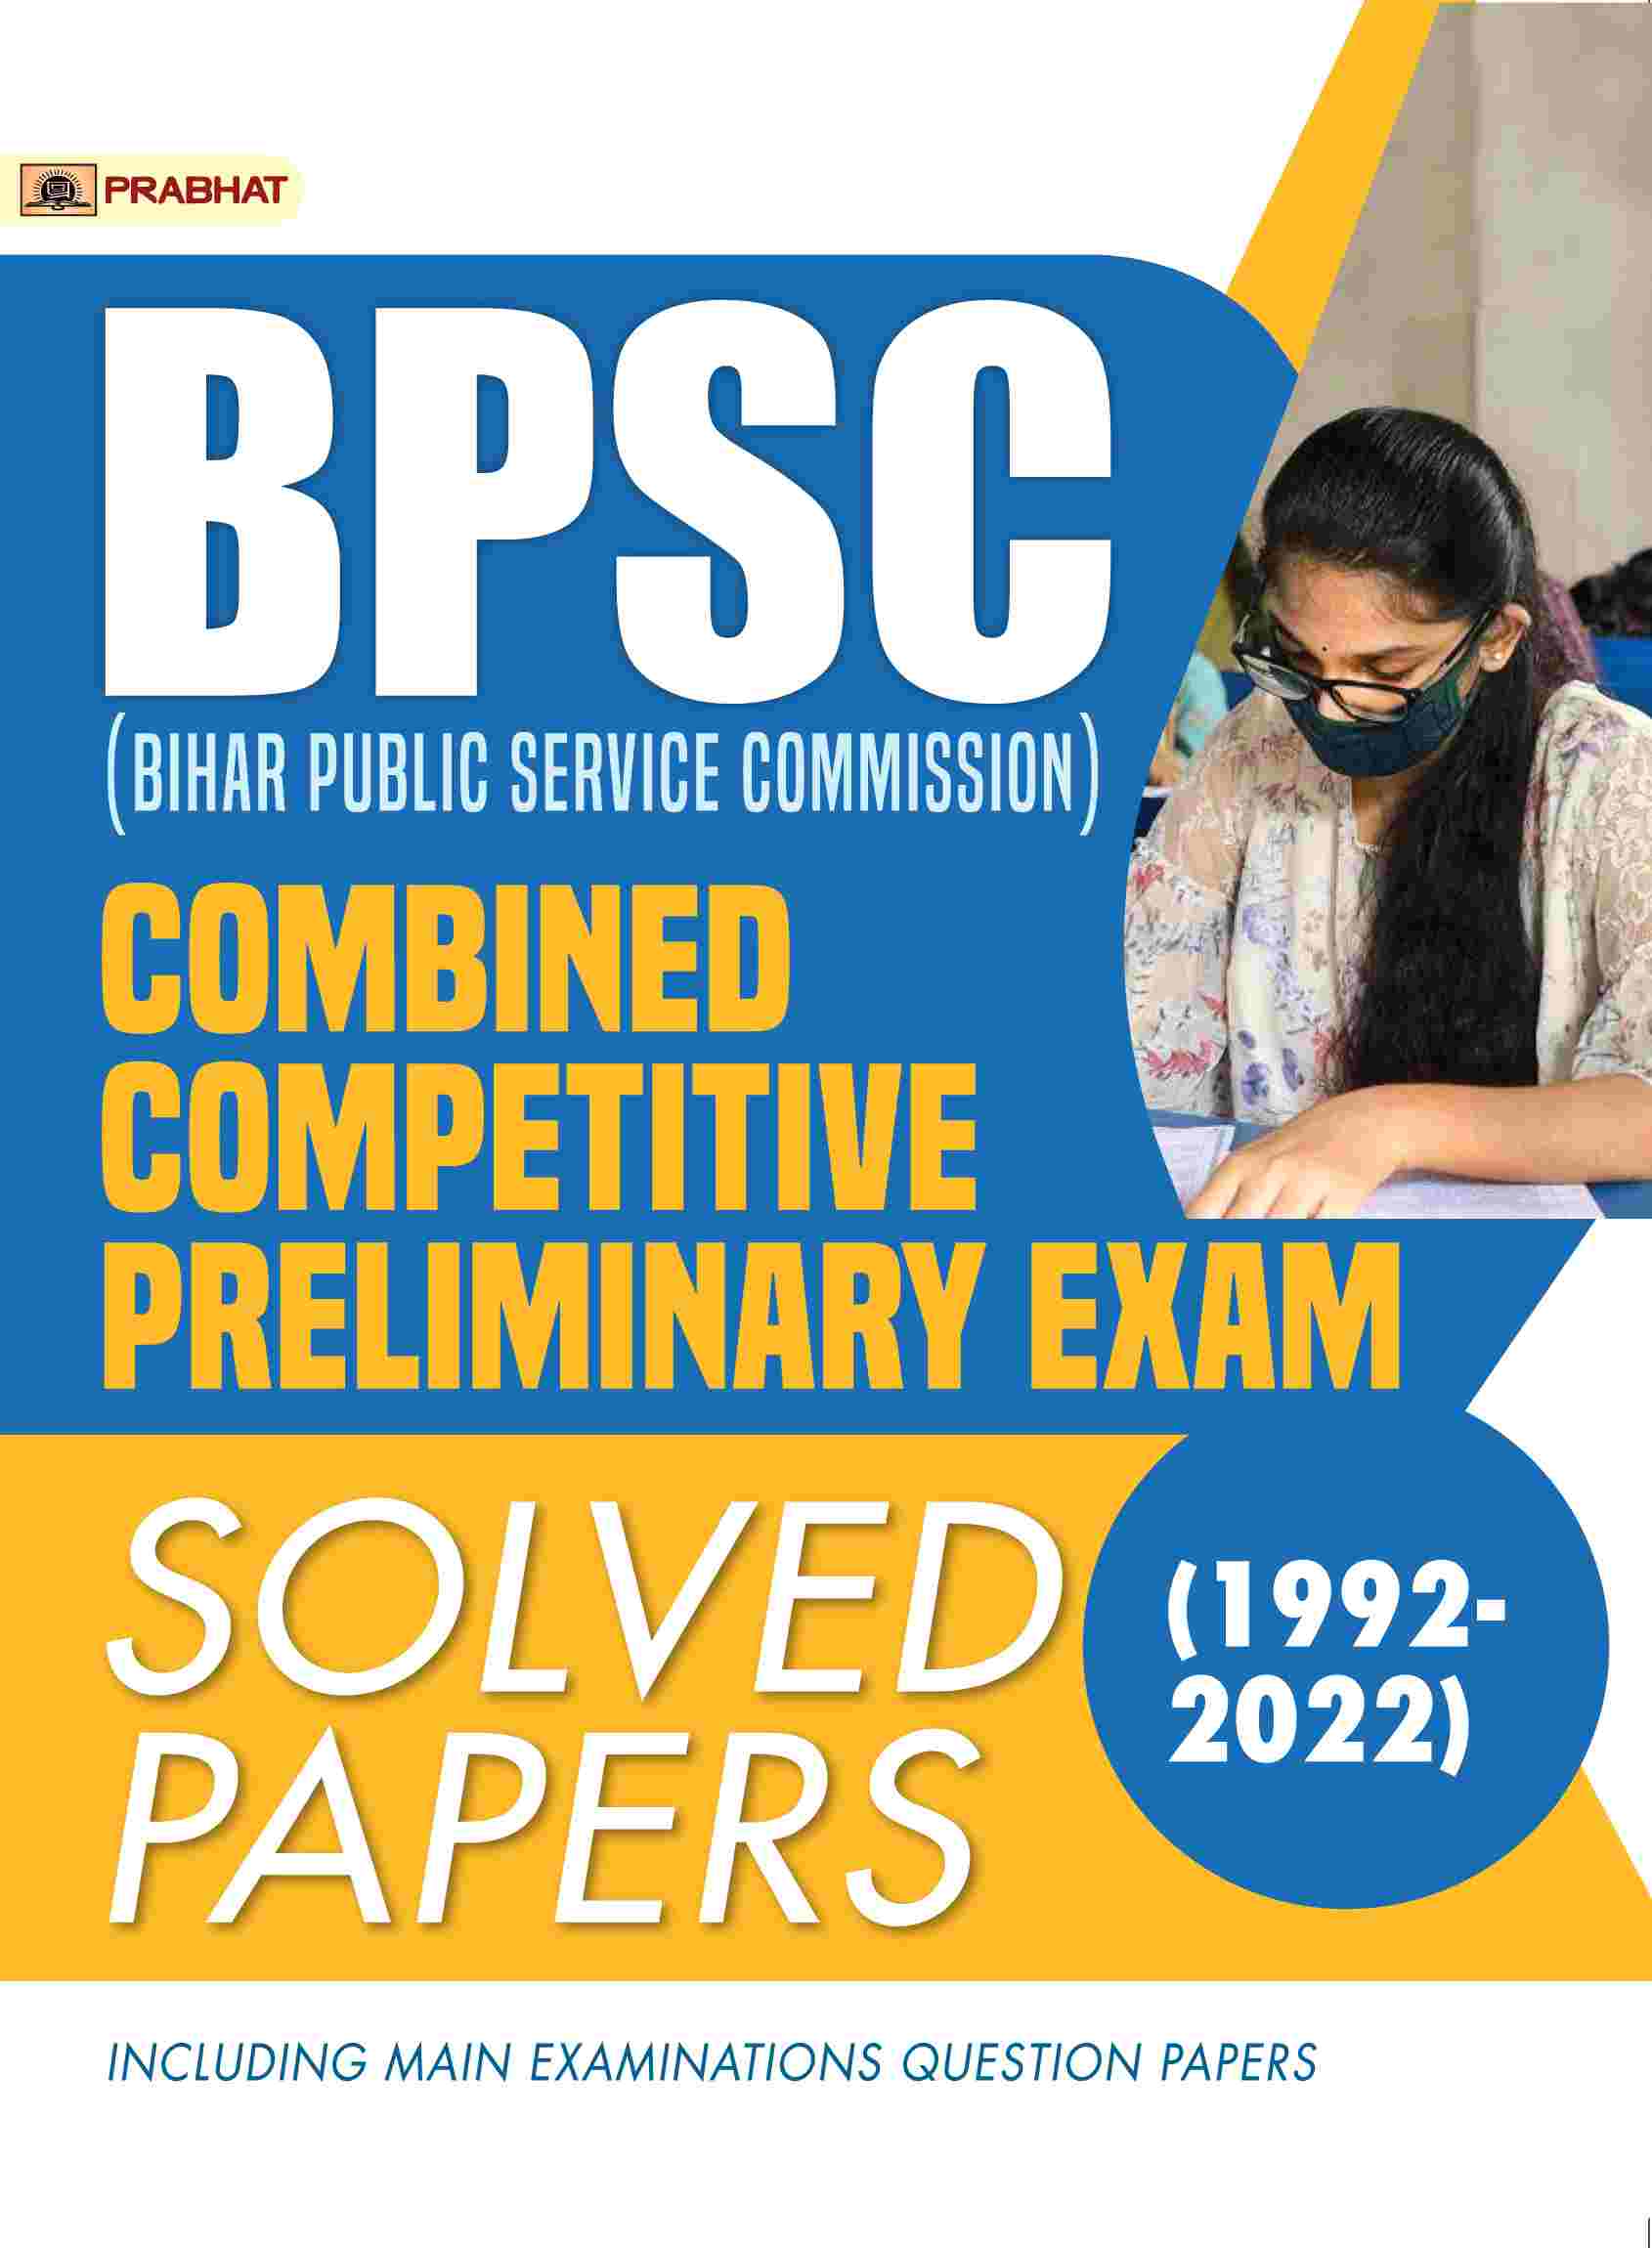 BPSC (Bihar Public Service Commission) Combined Competitive Preliminary Exam Solved Papers (1992–2022)